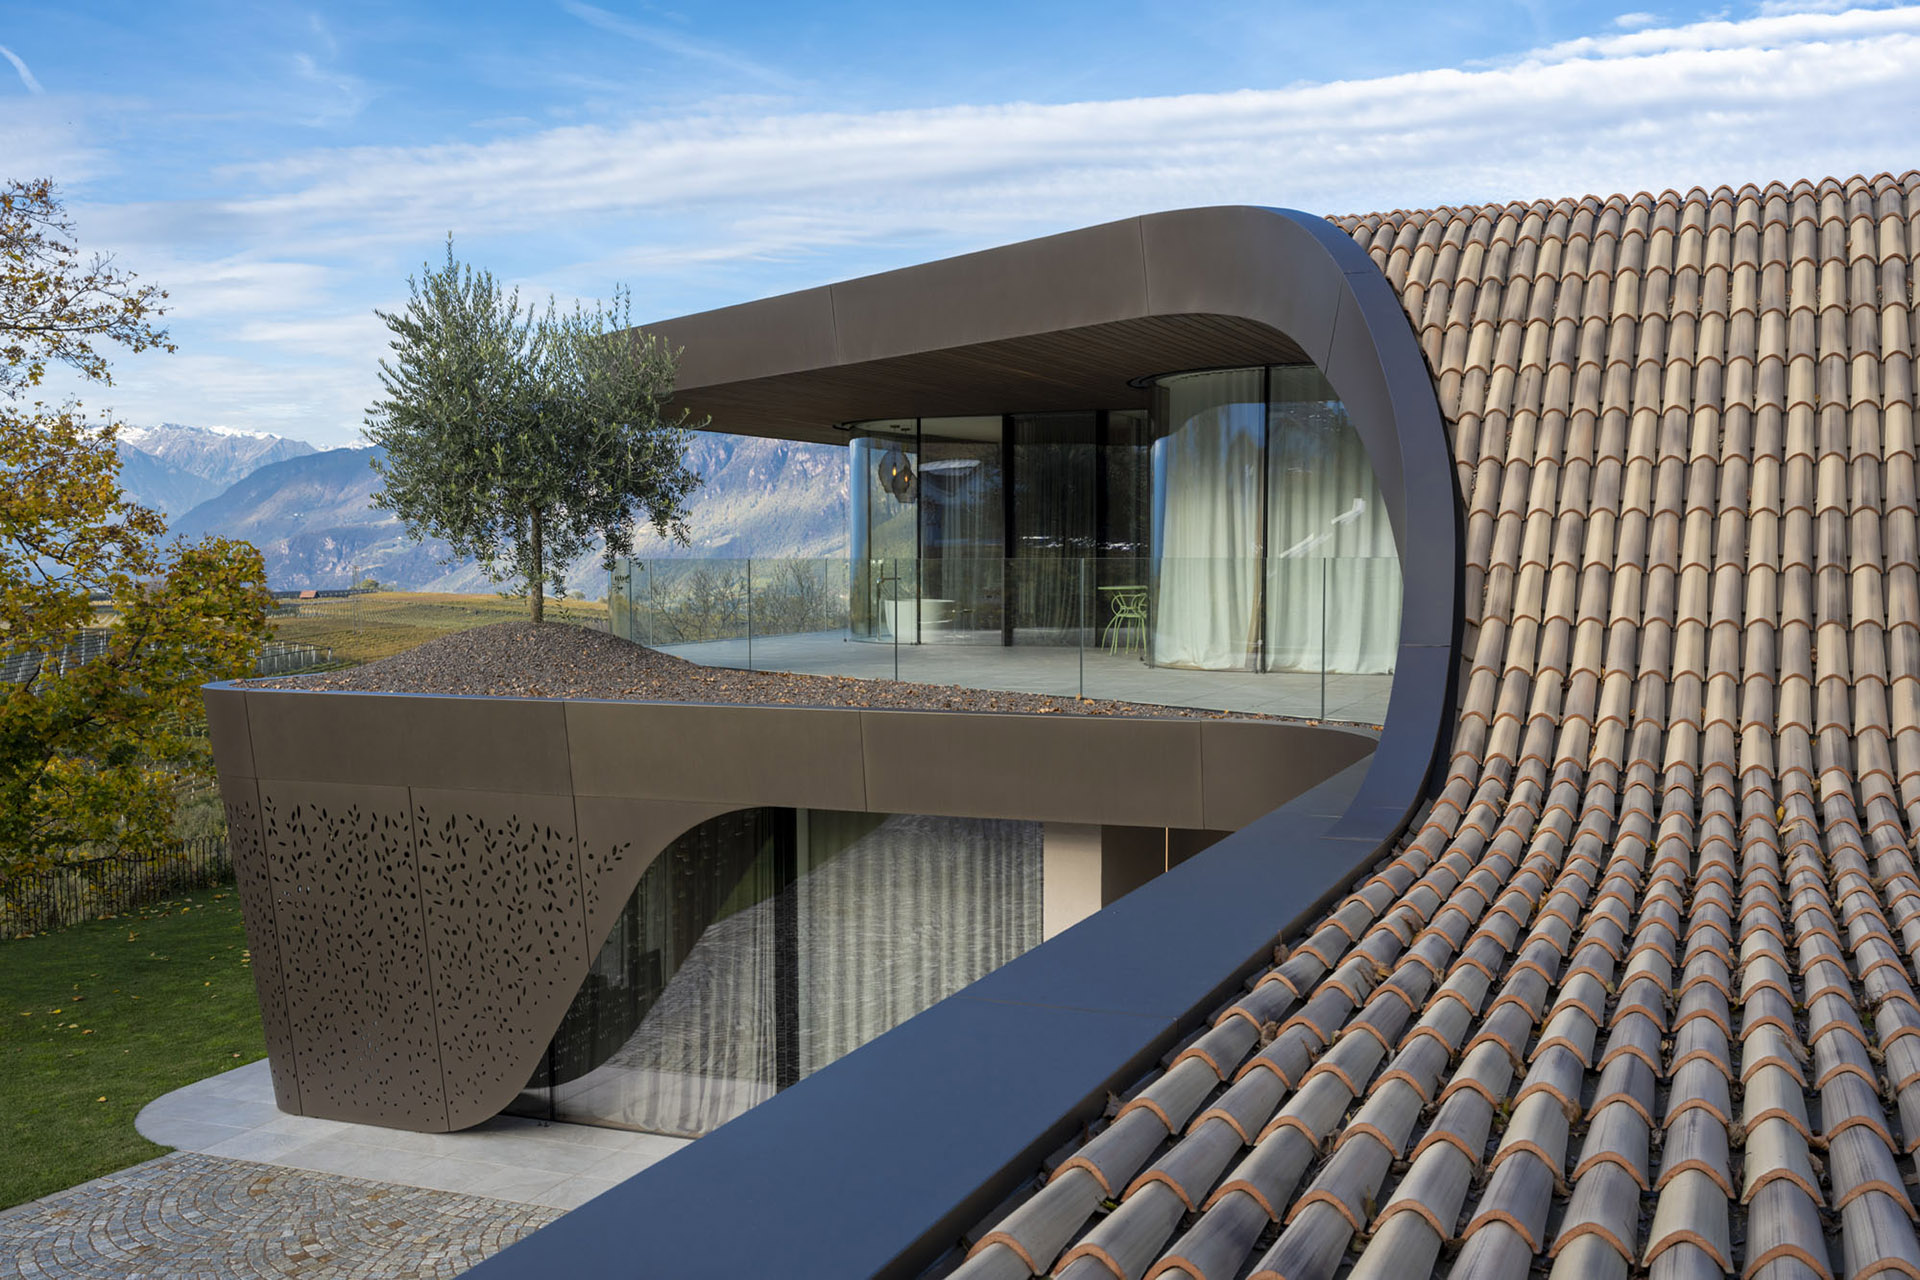 An organised architecture for Villa EB. A luxurious residence on the renowned Strada del Vino